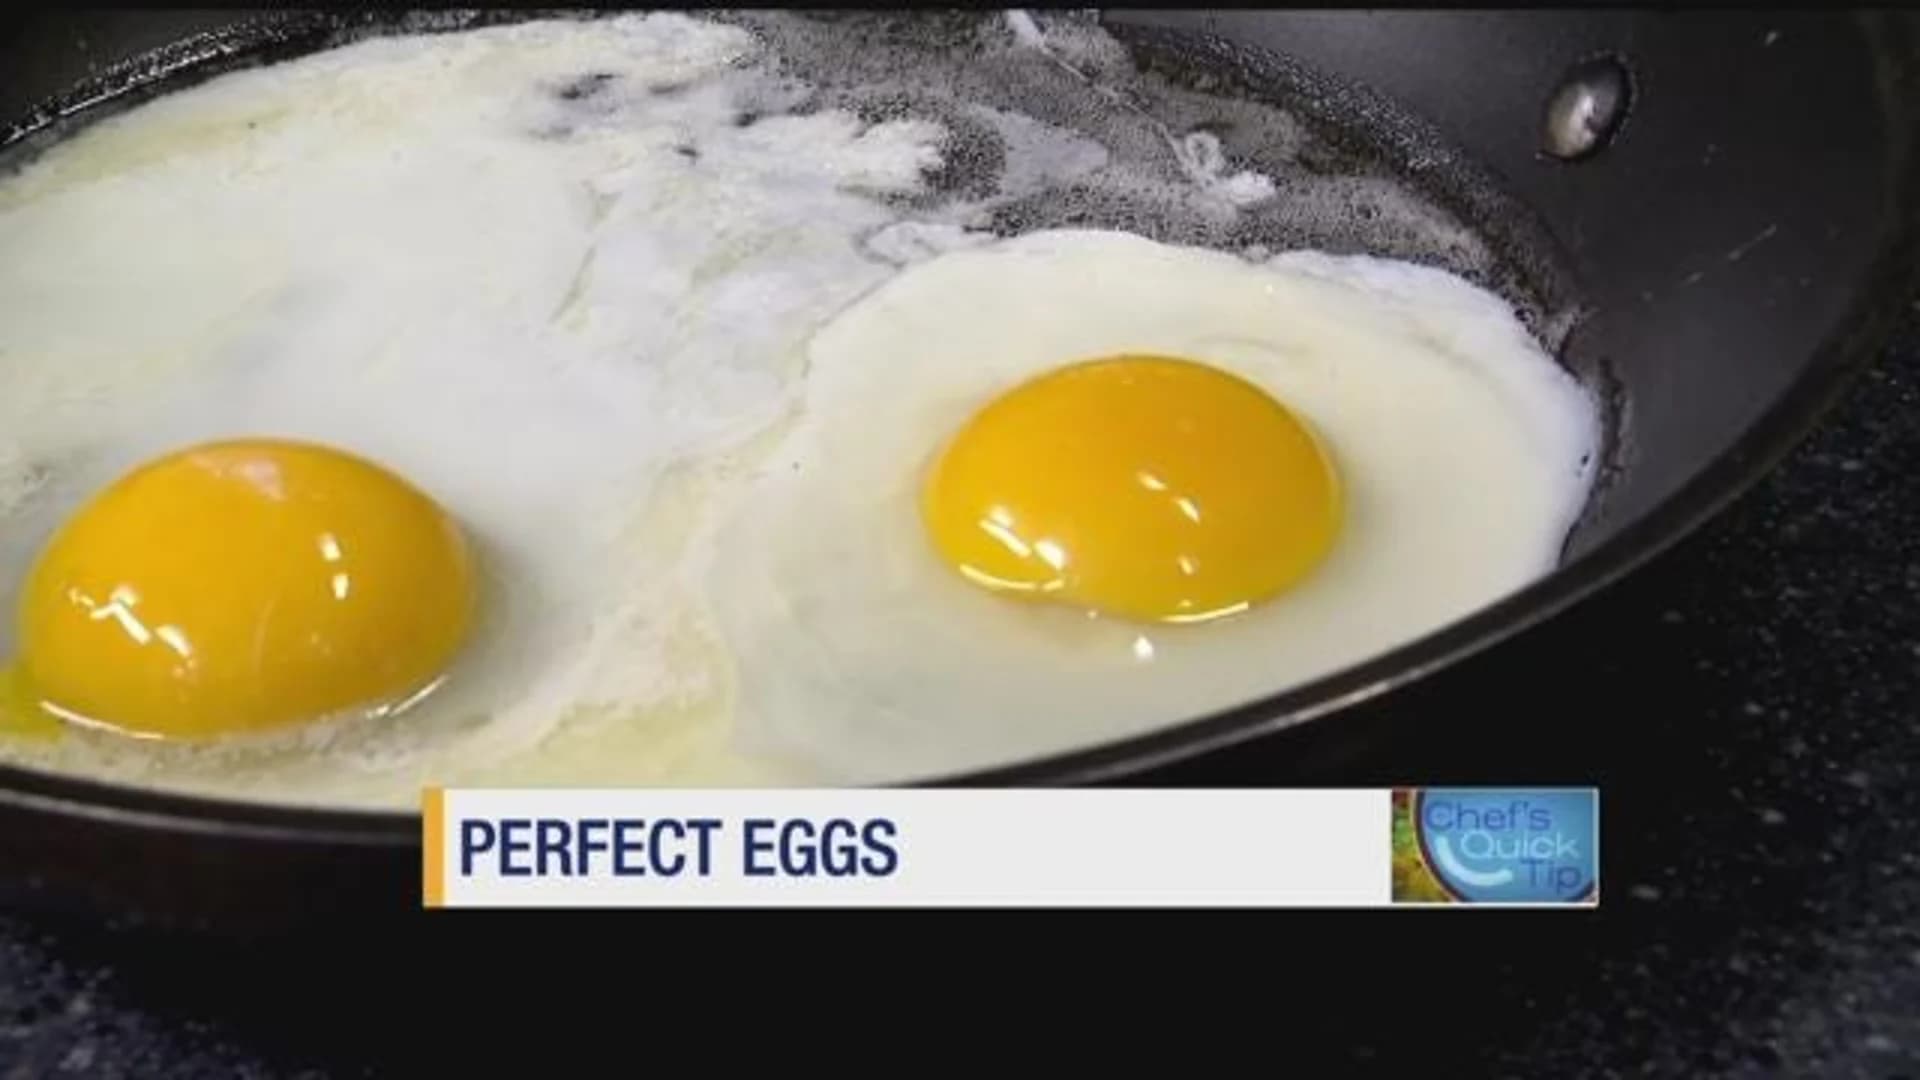 Chef's Quick Tips: Fried eggs